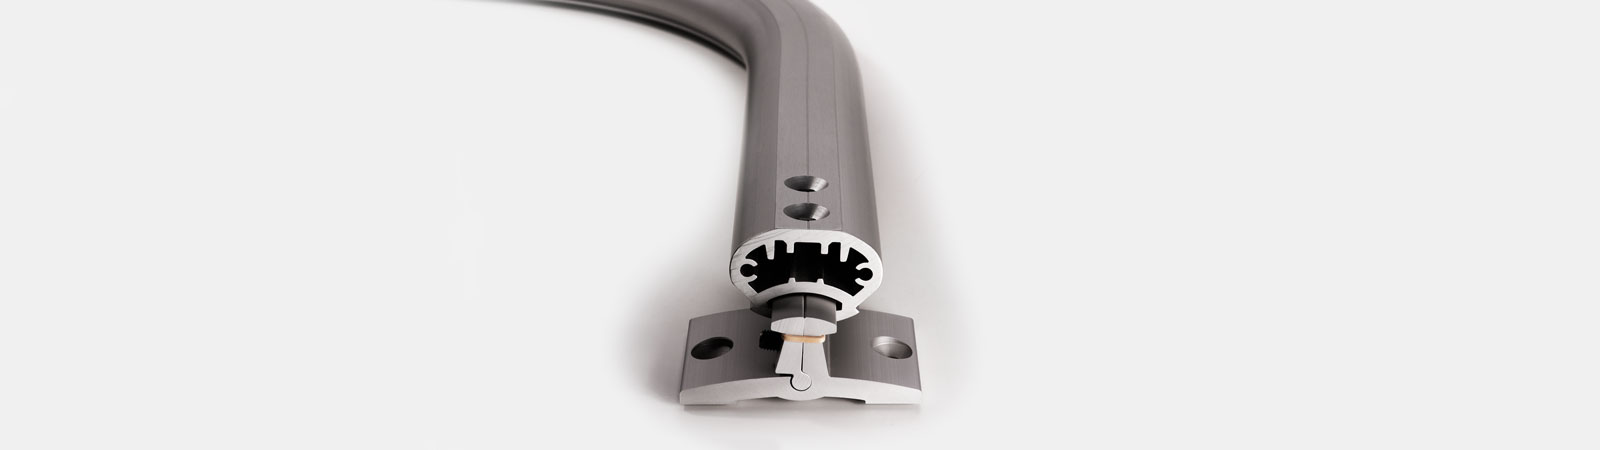 rail profiles and mounting clip